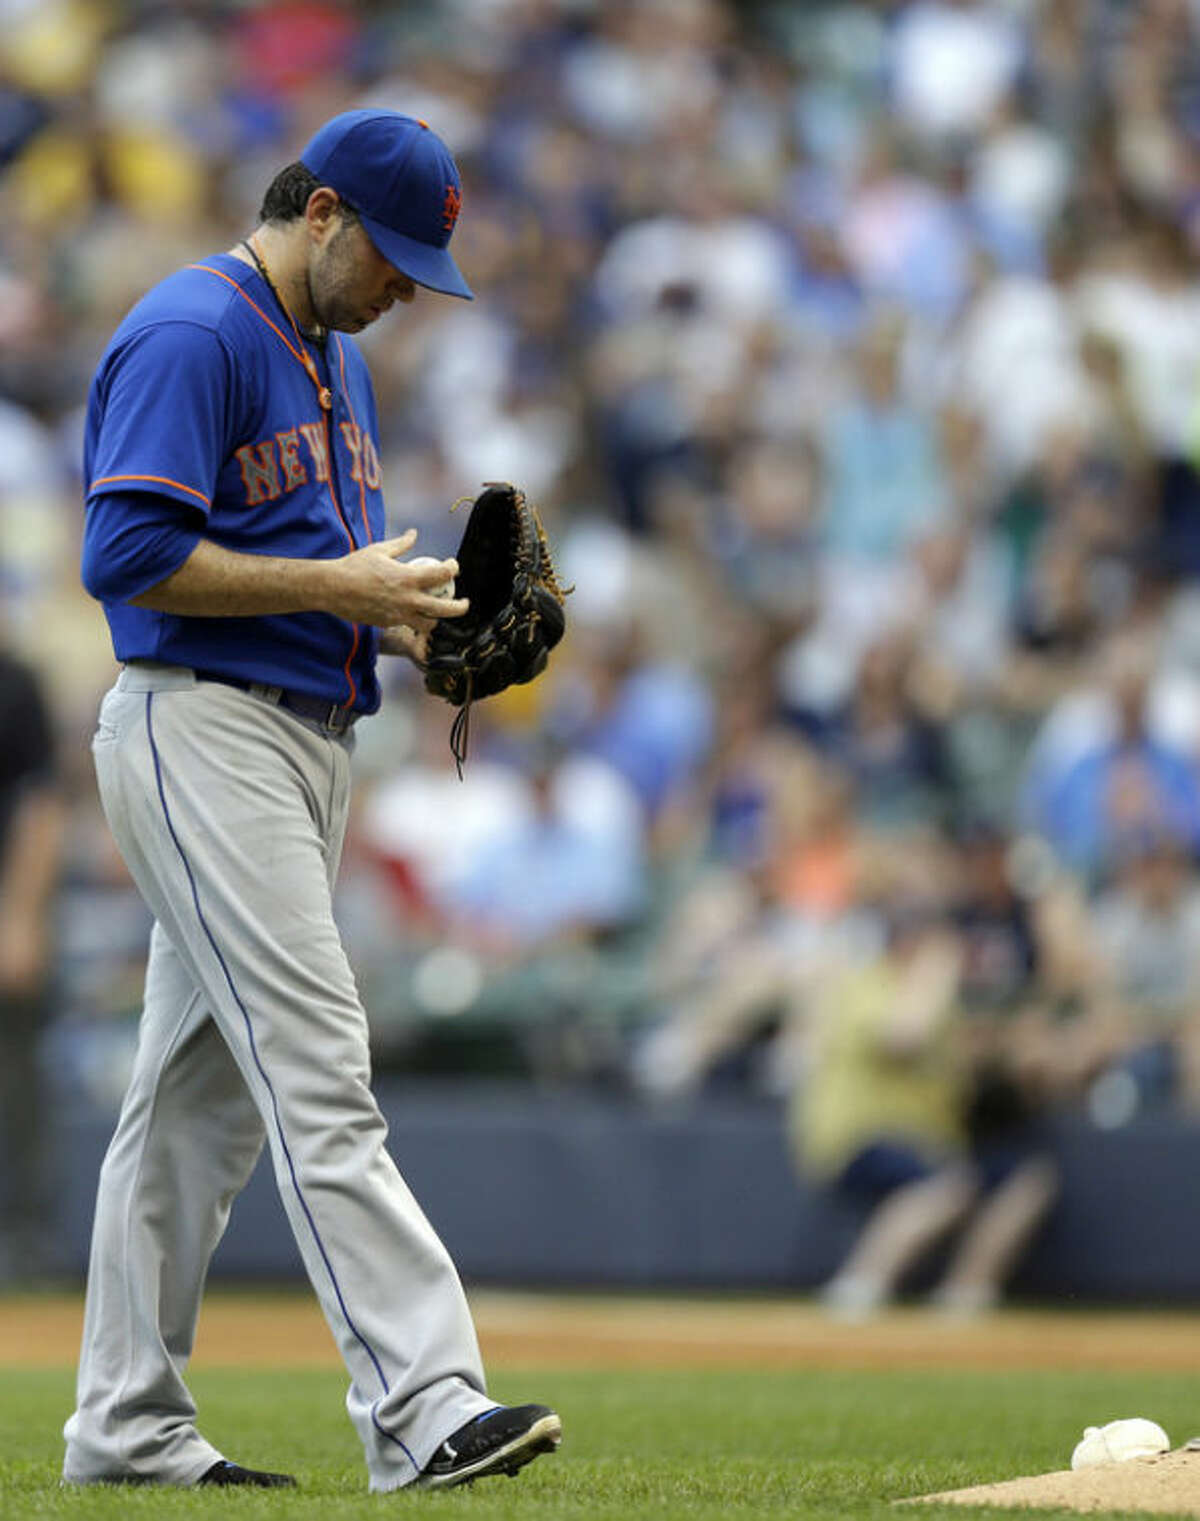 New York Mets starting pitcher Shaun Marcum walks back to the mound during the third inning of a baseball game against the Milwaukee Brewers, Saturday, July 6, 2013, in Milwaukee. (AP Photo/Jeffrey Phelps)